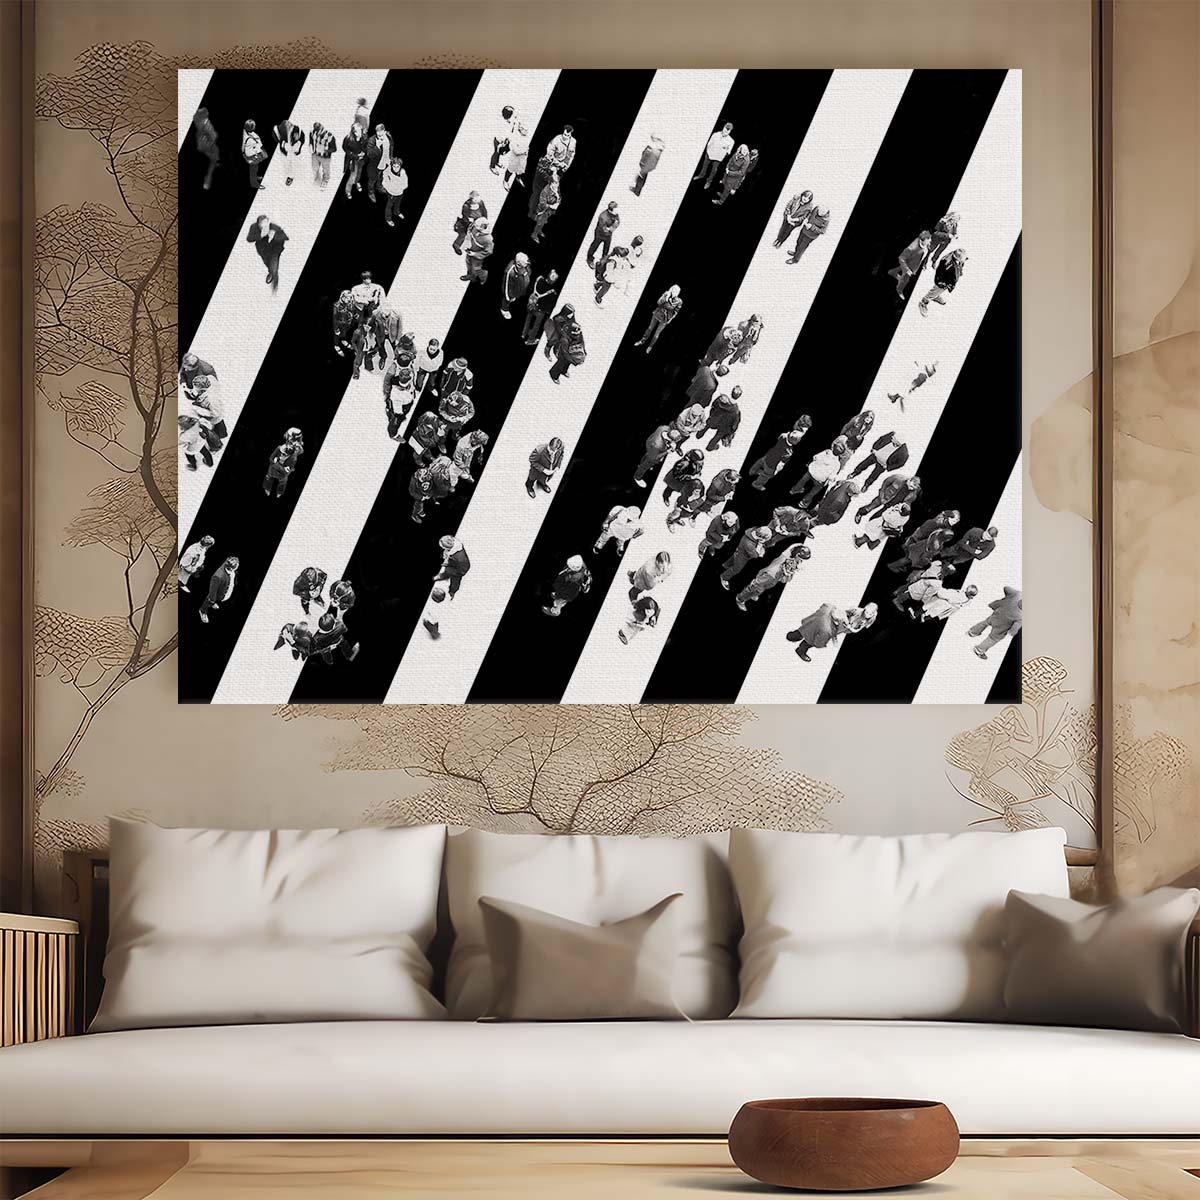 Urban Zebra Crossing Aerial BW Cityscape Wall Art by Luxuriance Designs. Made in USA.